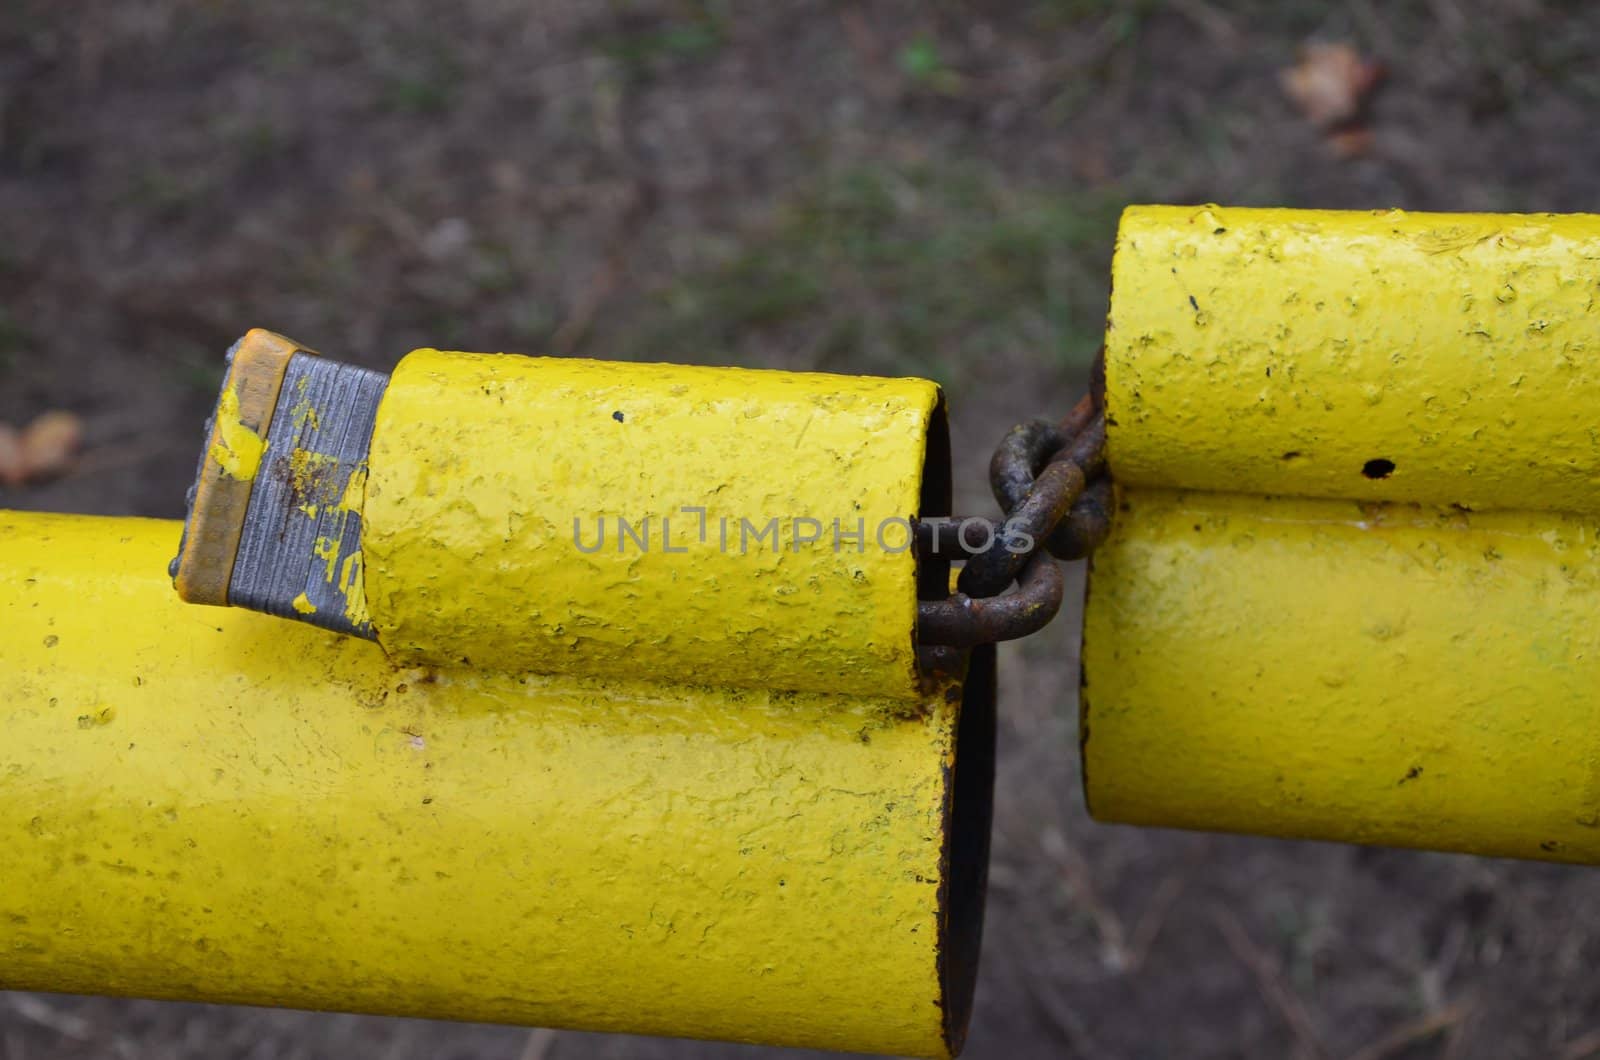 An old yellow gate secured with a pad lock and shown up close,